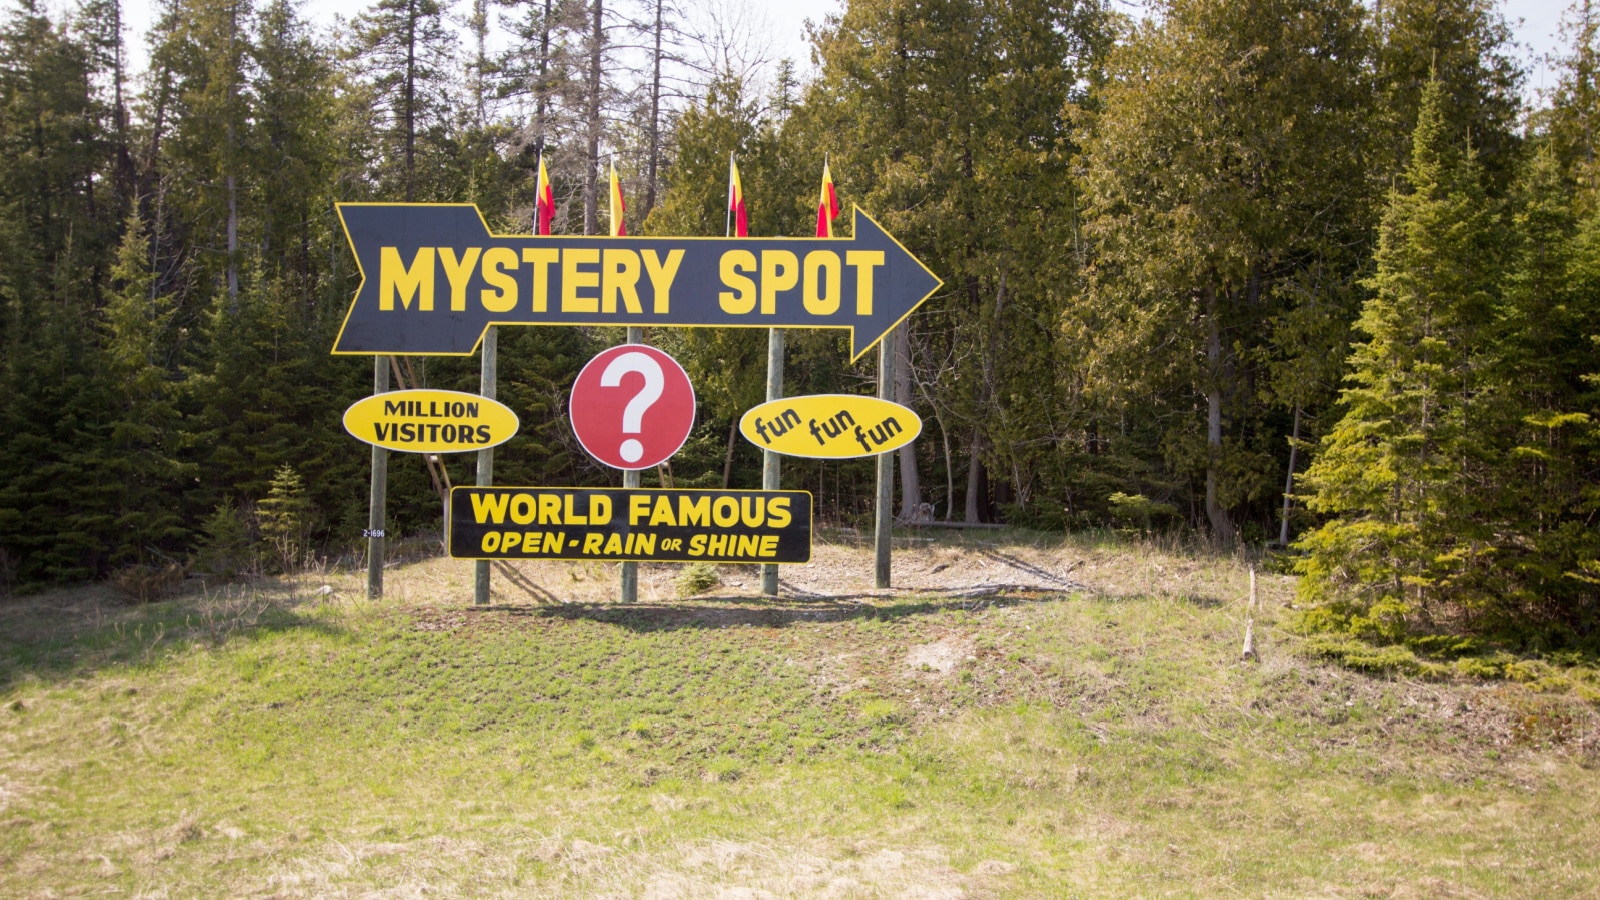 St. Ignace, Michigan, USA - May 6, 2016: Billboard sign for the famous Mystery Spot in the Upper Peninsula. The popular attraction features guided tours of an area that seems to defy gravity.